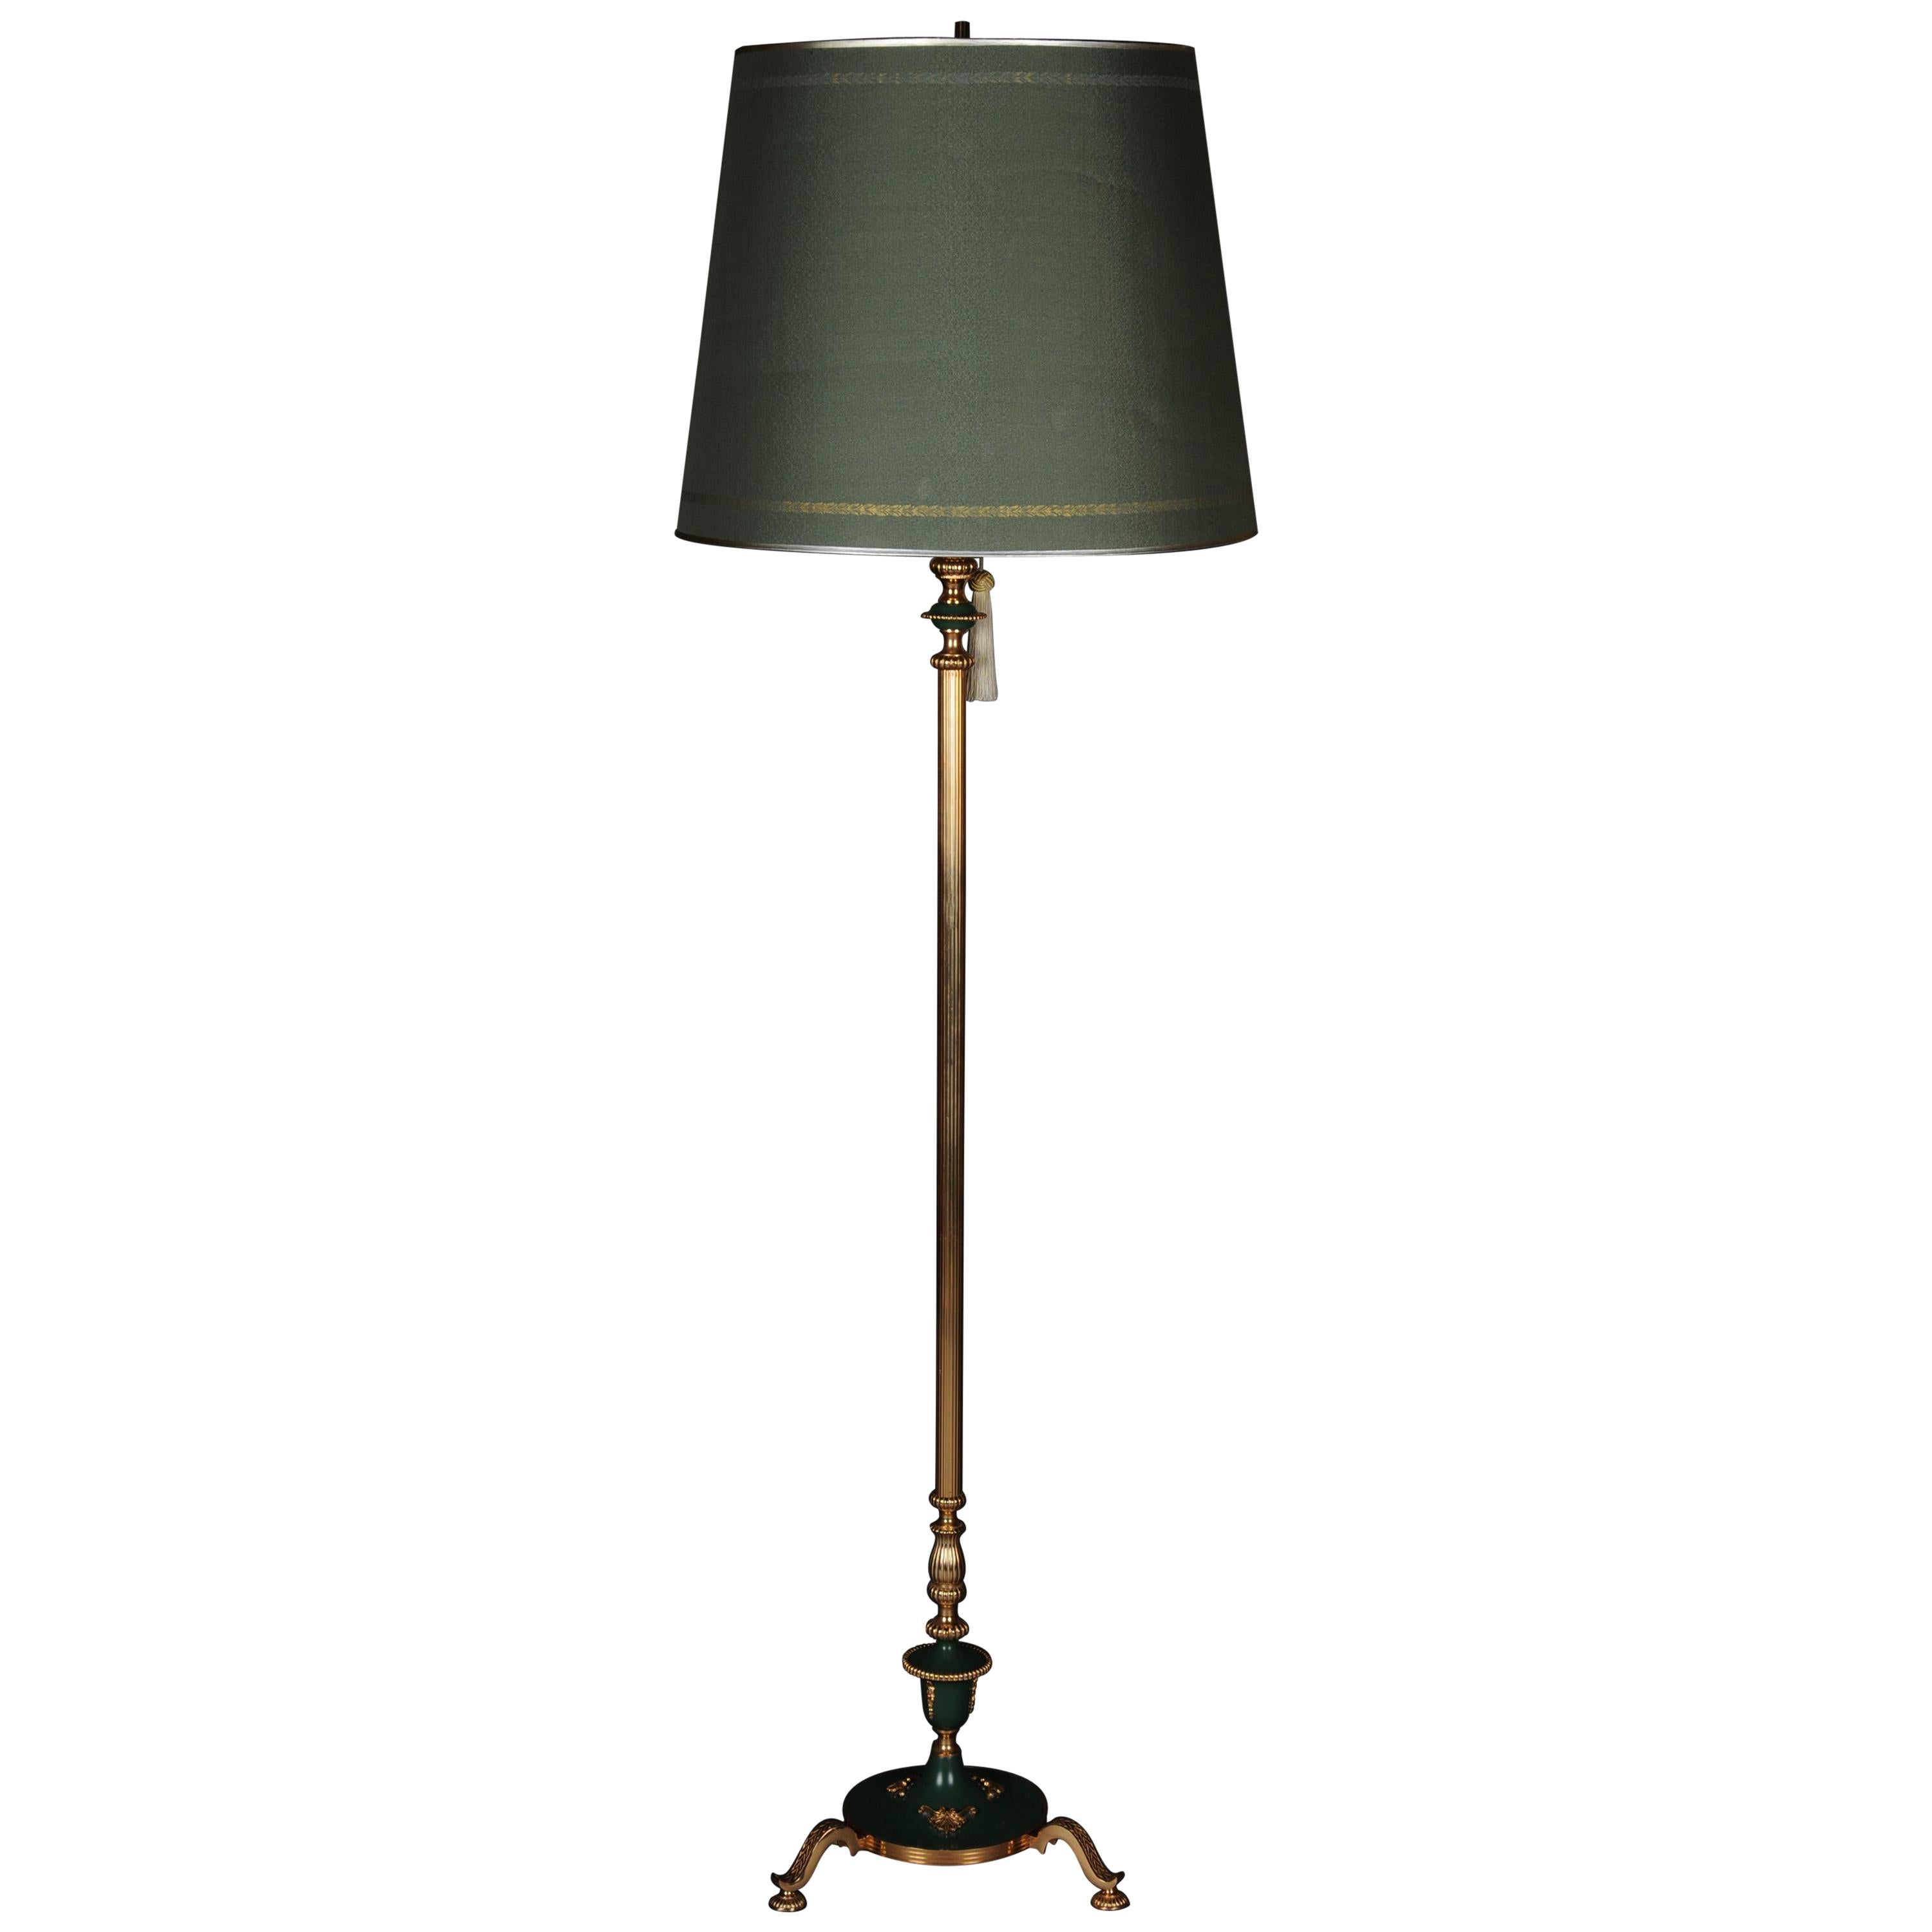 Beautiful French Floor Lamp in Empire Style, 20th Century